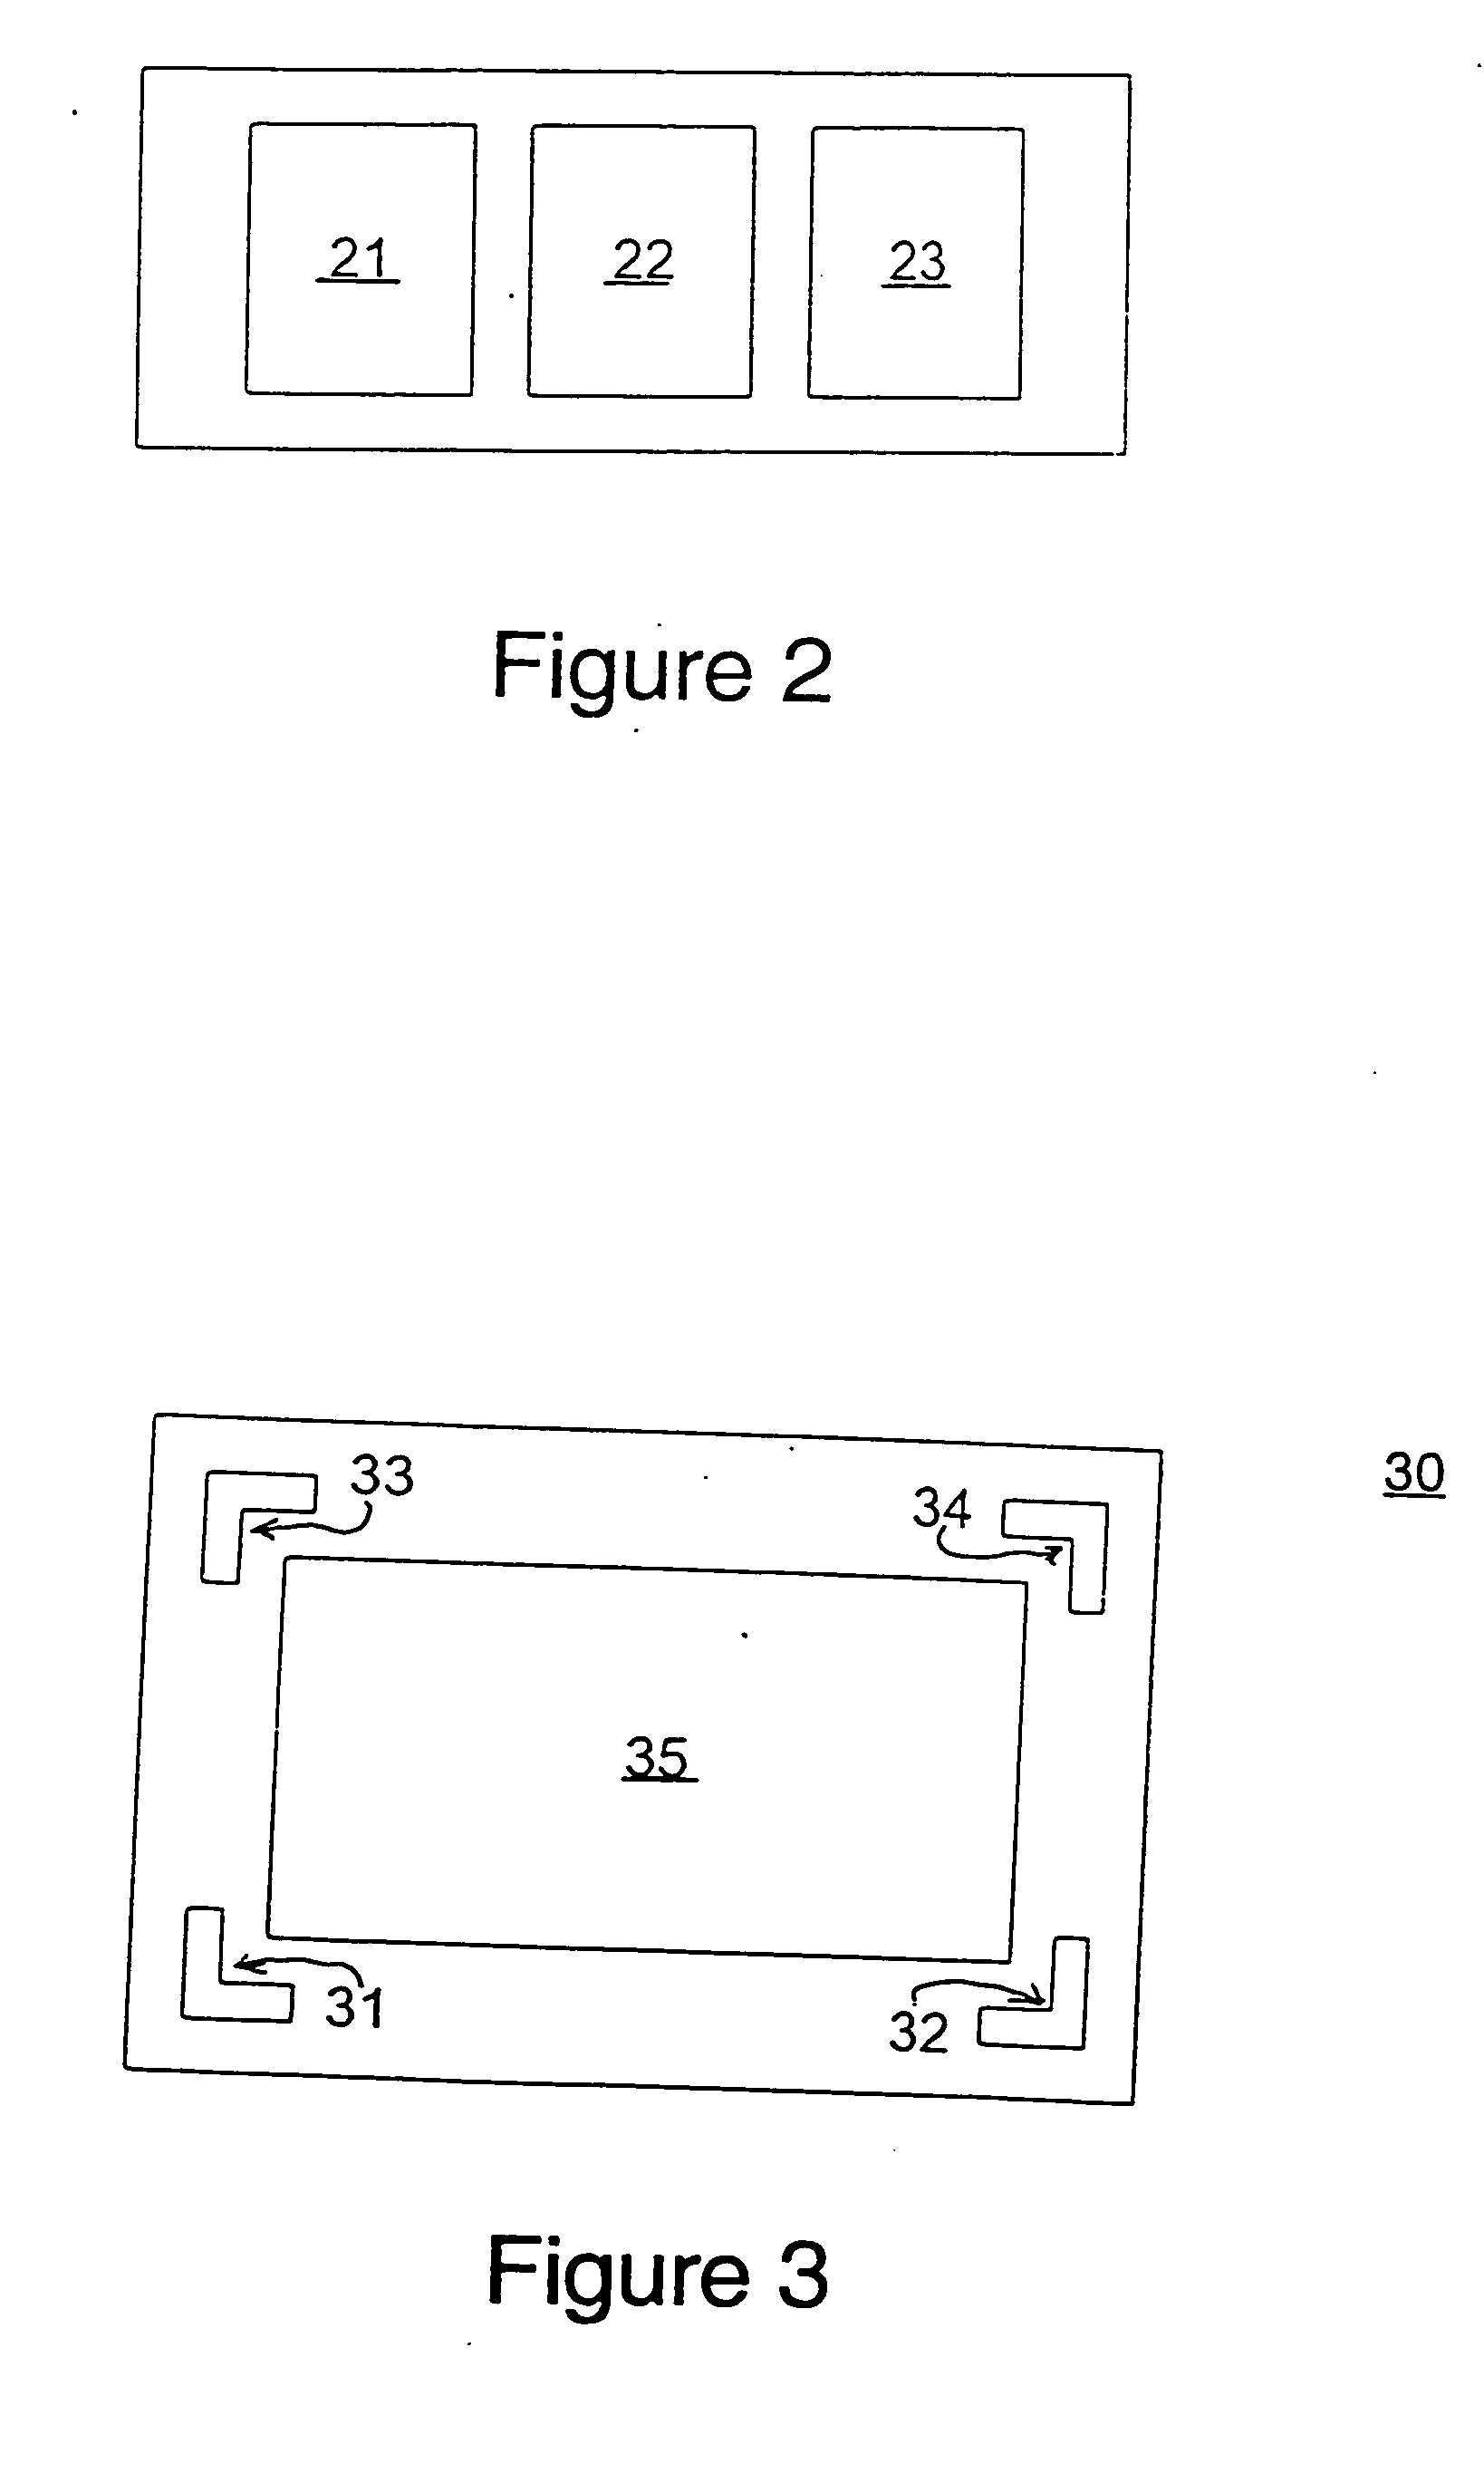 Methods for patterning substrates having arbitrary and unexpected dimensional changes